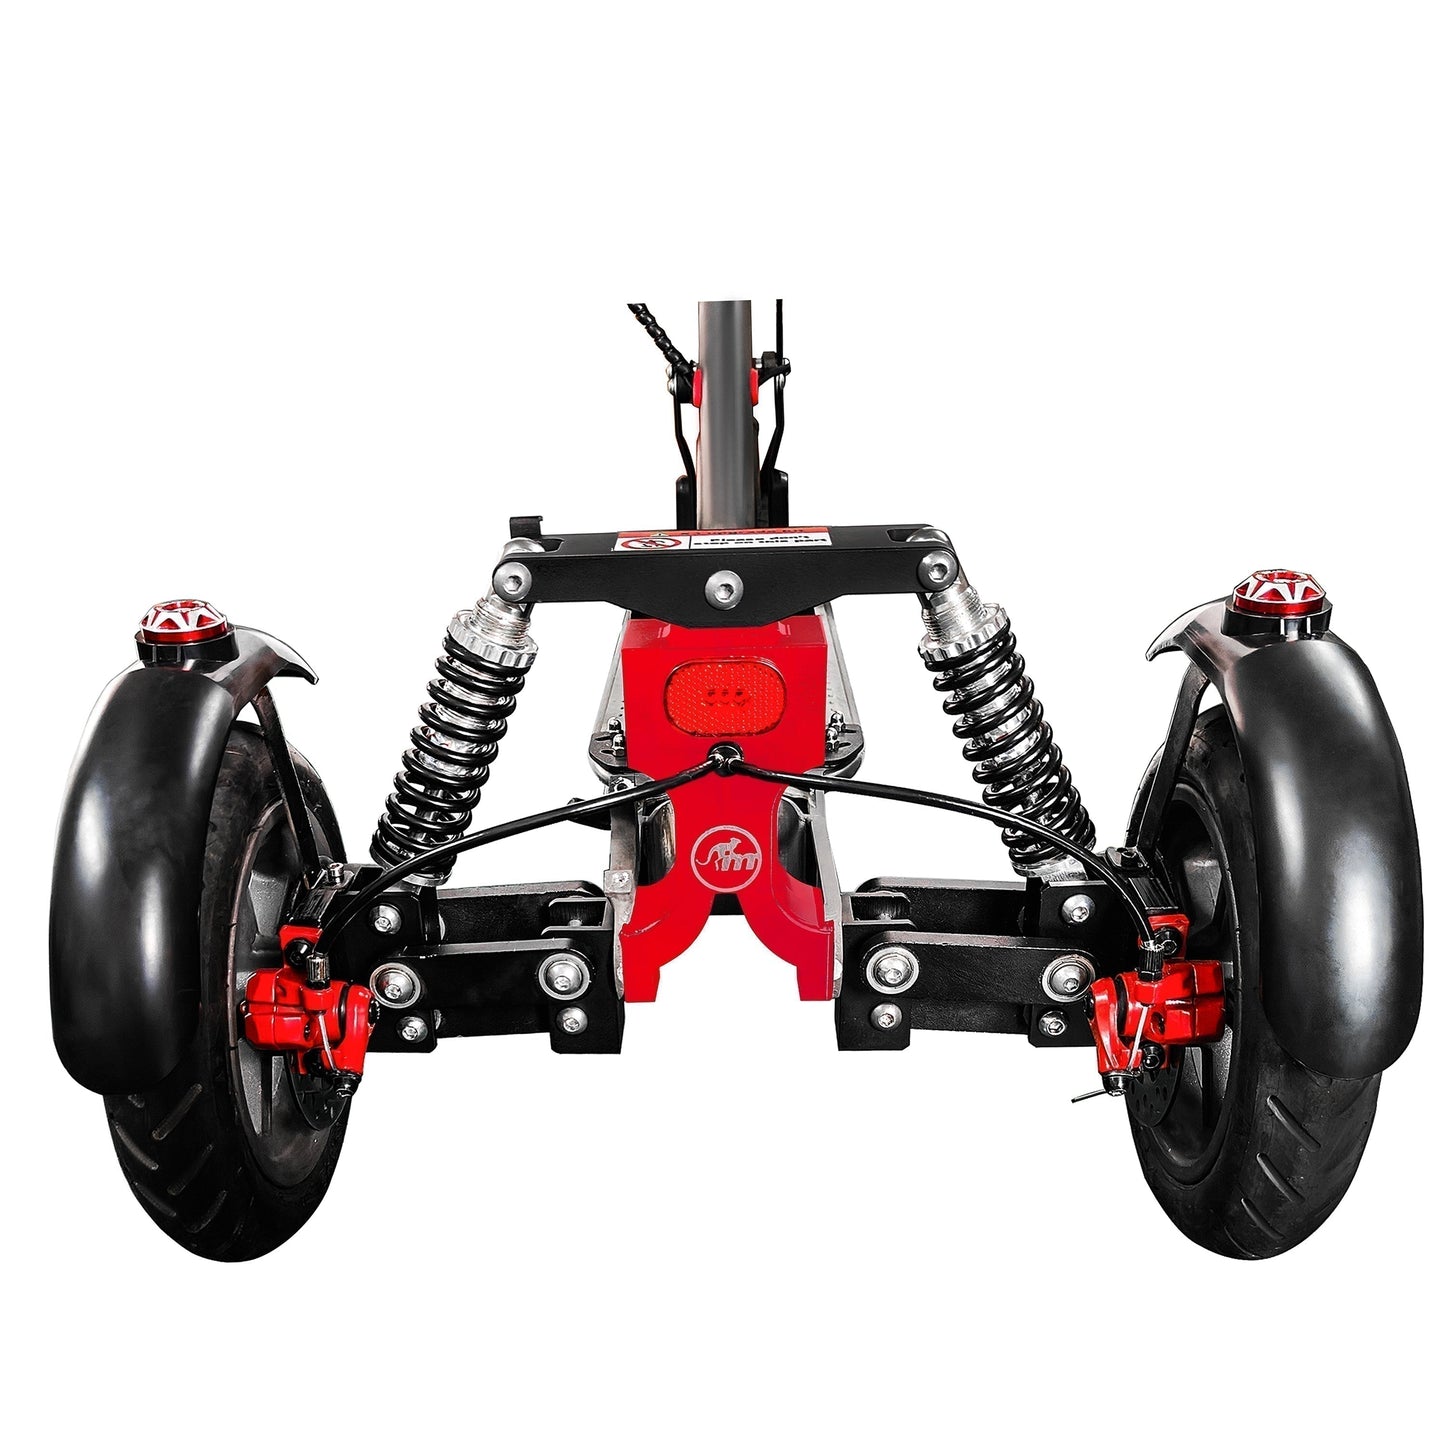 Monorim X3 upgrade kit to be Three wheels special for urban glide 100 max frames